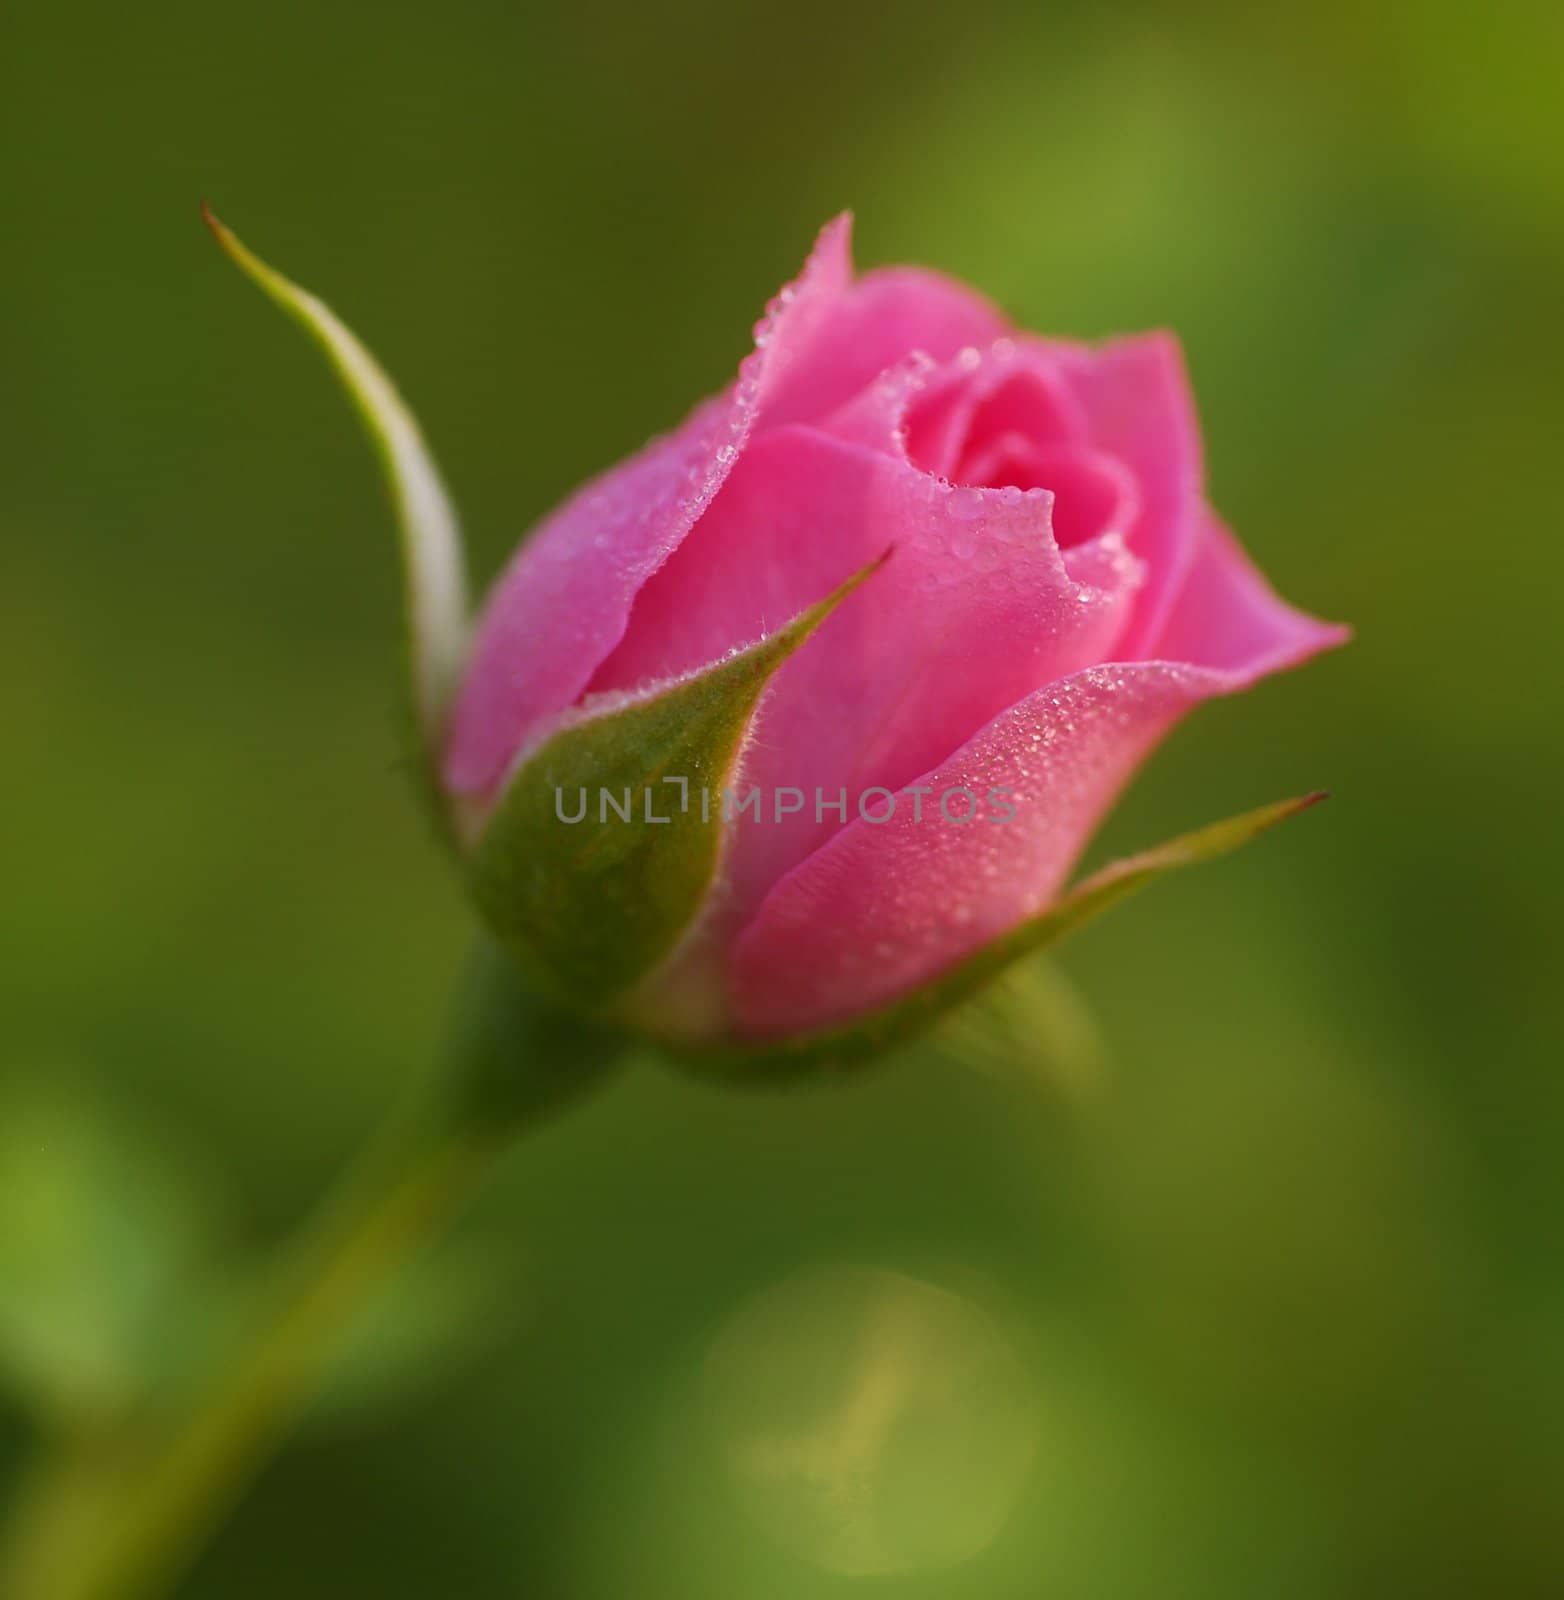 an isolated shot of a Rose Flower bud